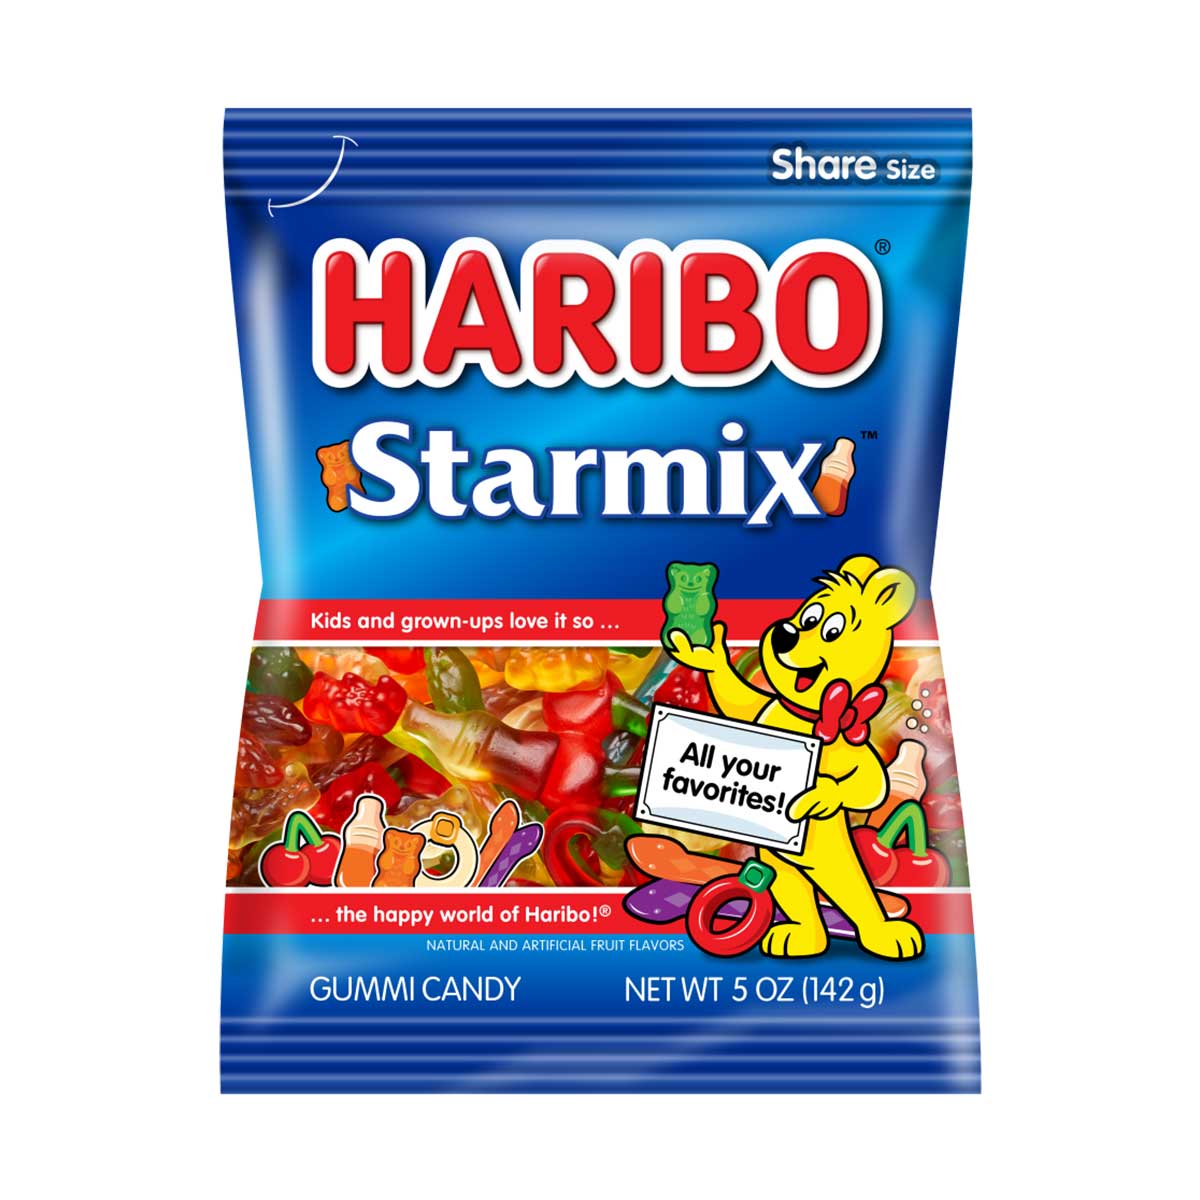 rive ned søster Lover Haribo Starmix Mixed Gummy Candy, 5 oz (142 g)